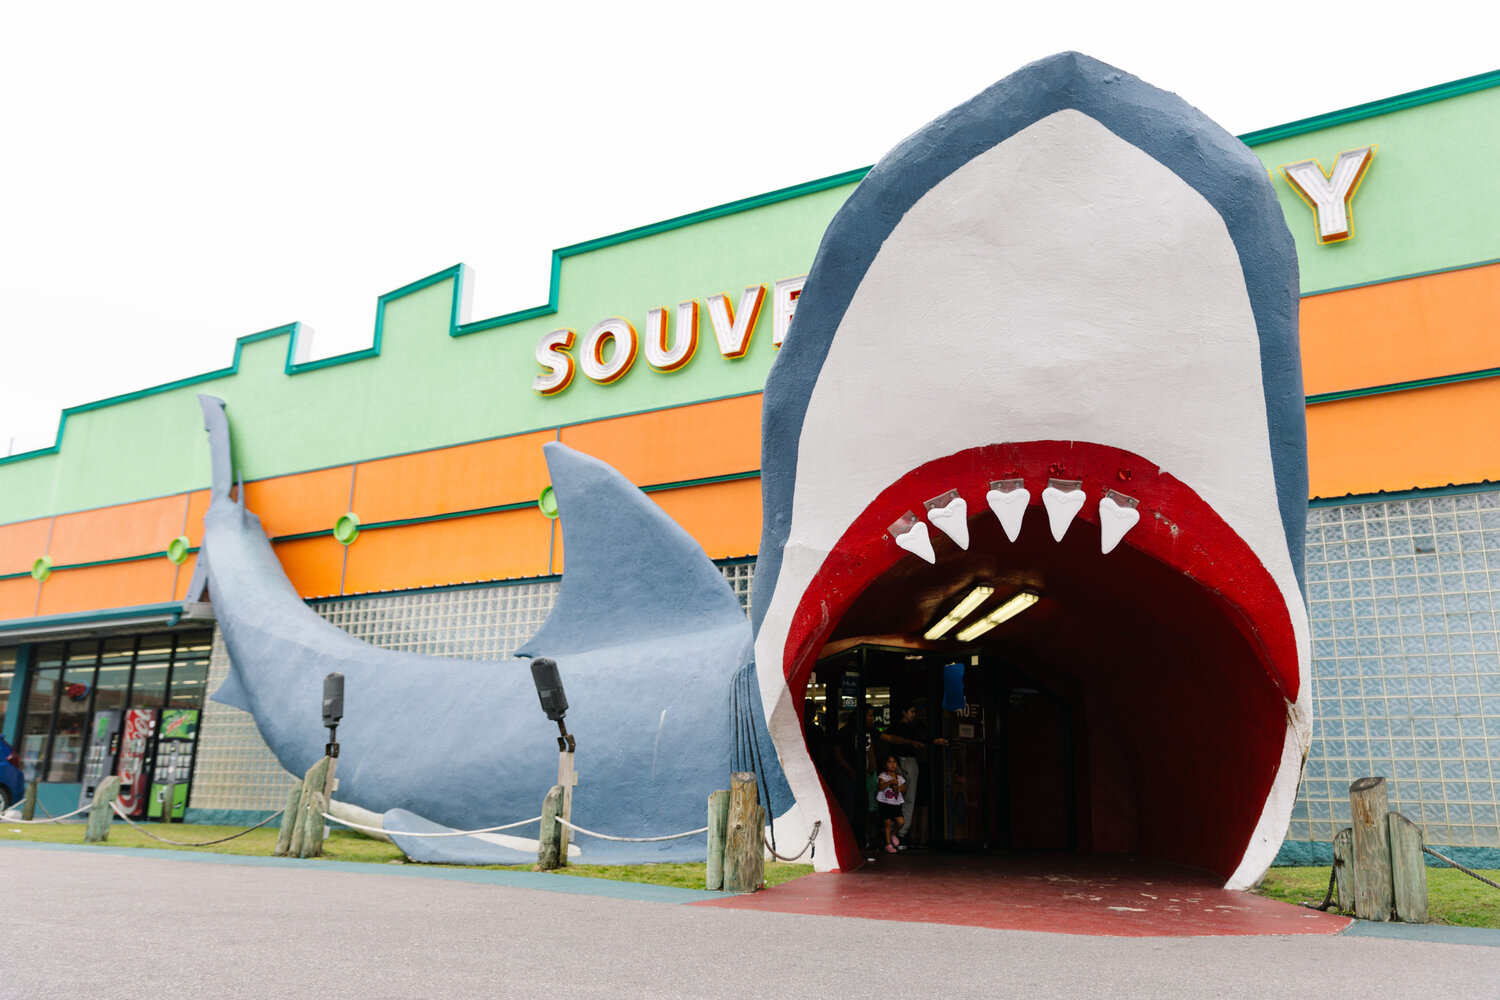 While traveling down Gulf Shores Parkway., a 70-foot blue shark can be easily spotted outside of the store. The idea of placing a shark outside of the store came to owner Clyde Weir while attending a gift show in Gatlinburg and seeing a shark at a miniature golf course. The shark, initially 50-feet long, survived a fire that destroyed the store on Feb. 4, 1996. When the store was rebuilt, the concrete shark grew to 70-feet, becoming a prominent photo spot at the beach.